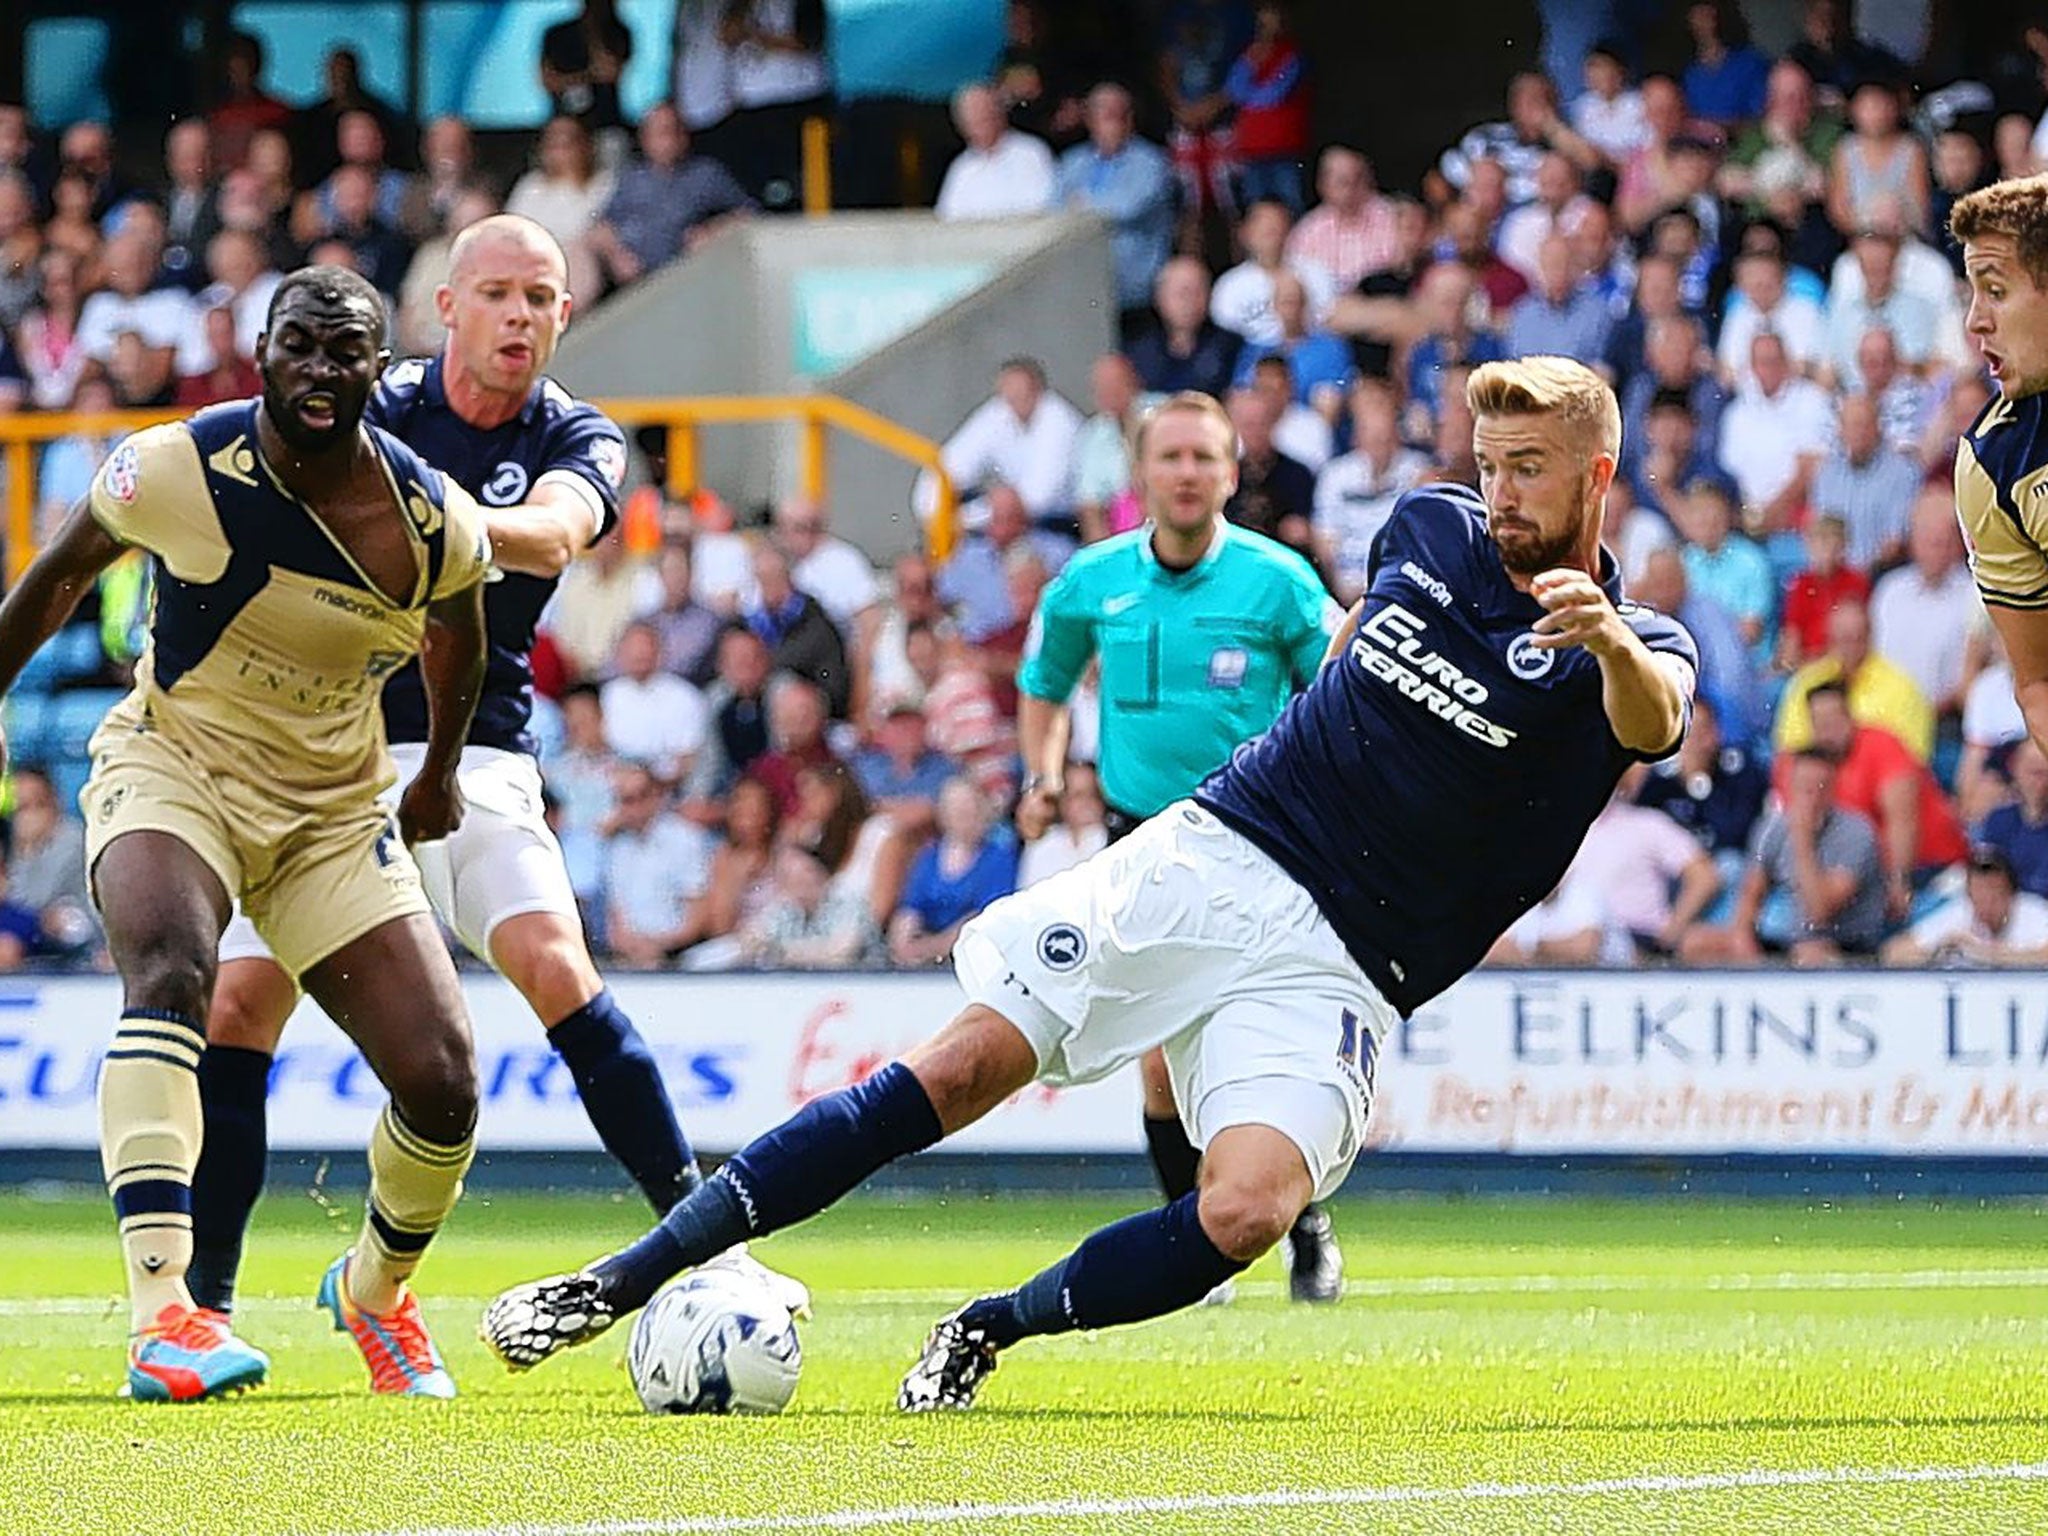 Early blow: Mark Beevers scores the first goal as Millwall defeat Leeds United